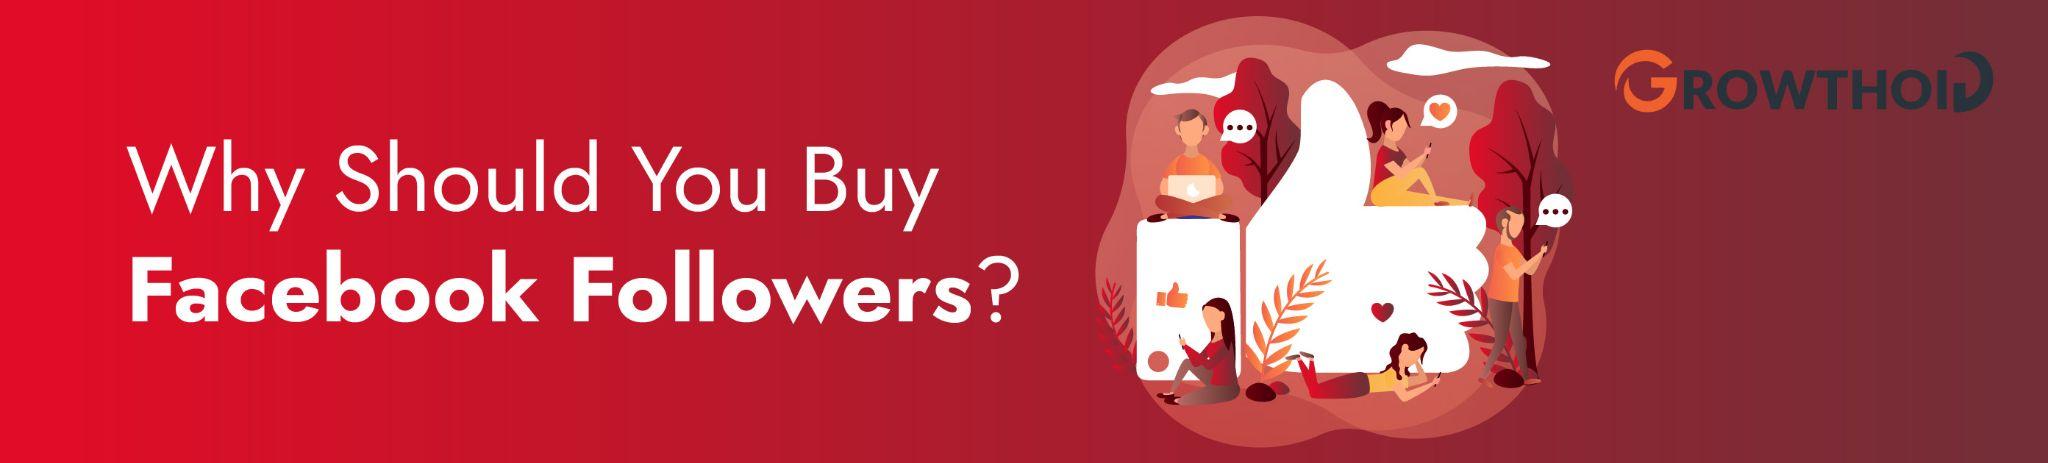 Why Should You Buy Facebook Followers?